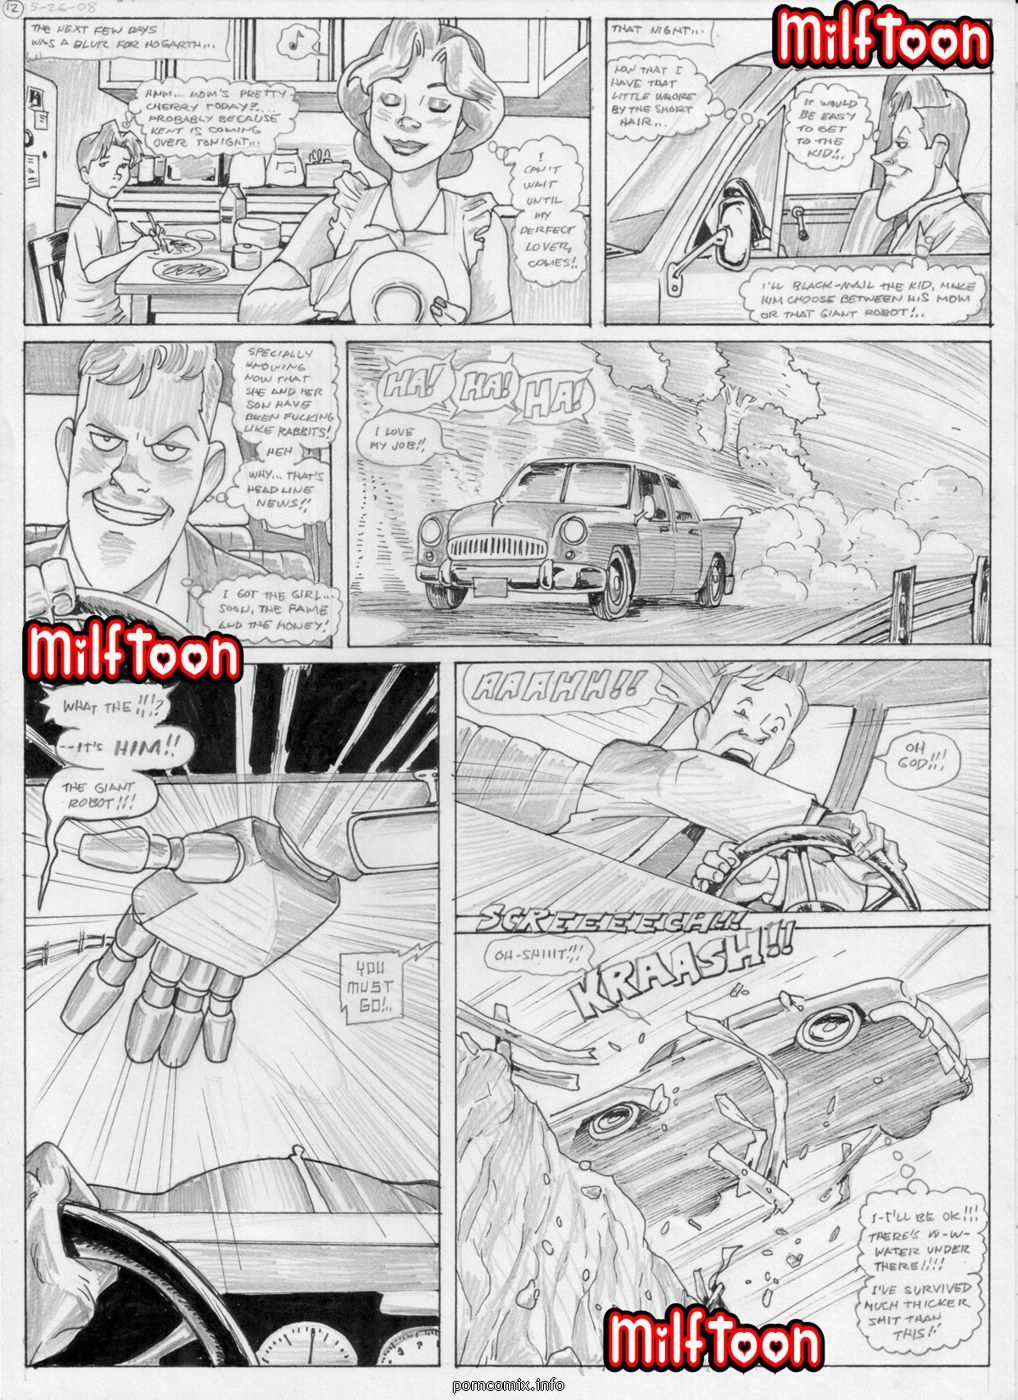 Milftoon - Iron Giant 2, Incest page 13